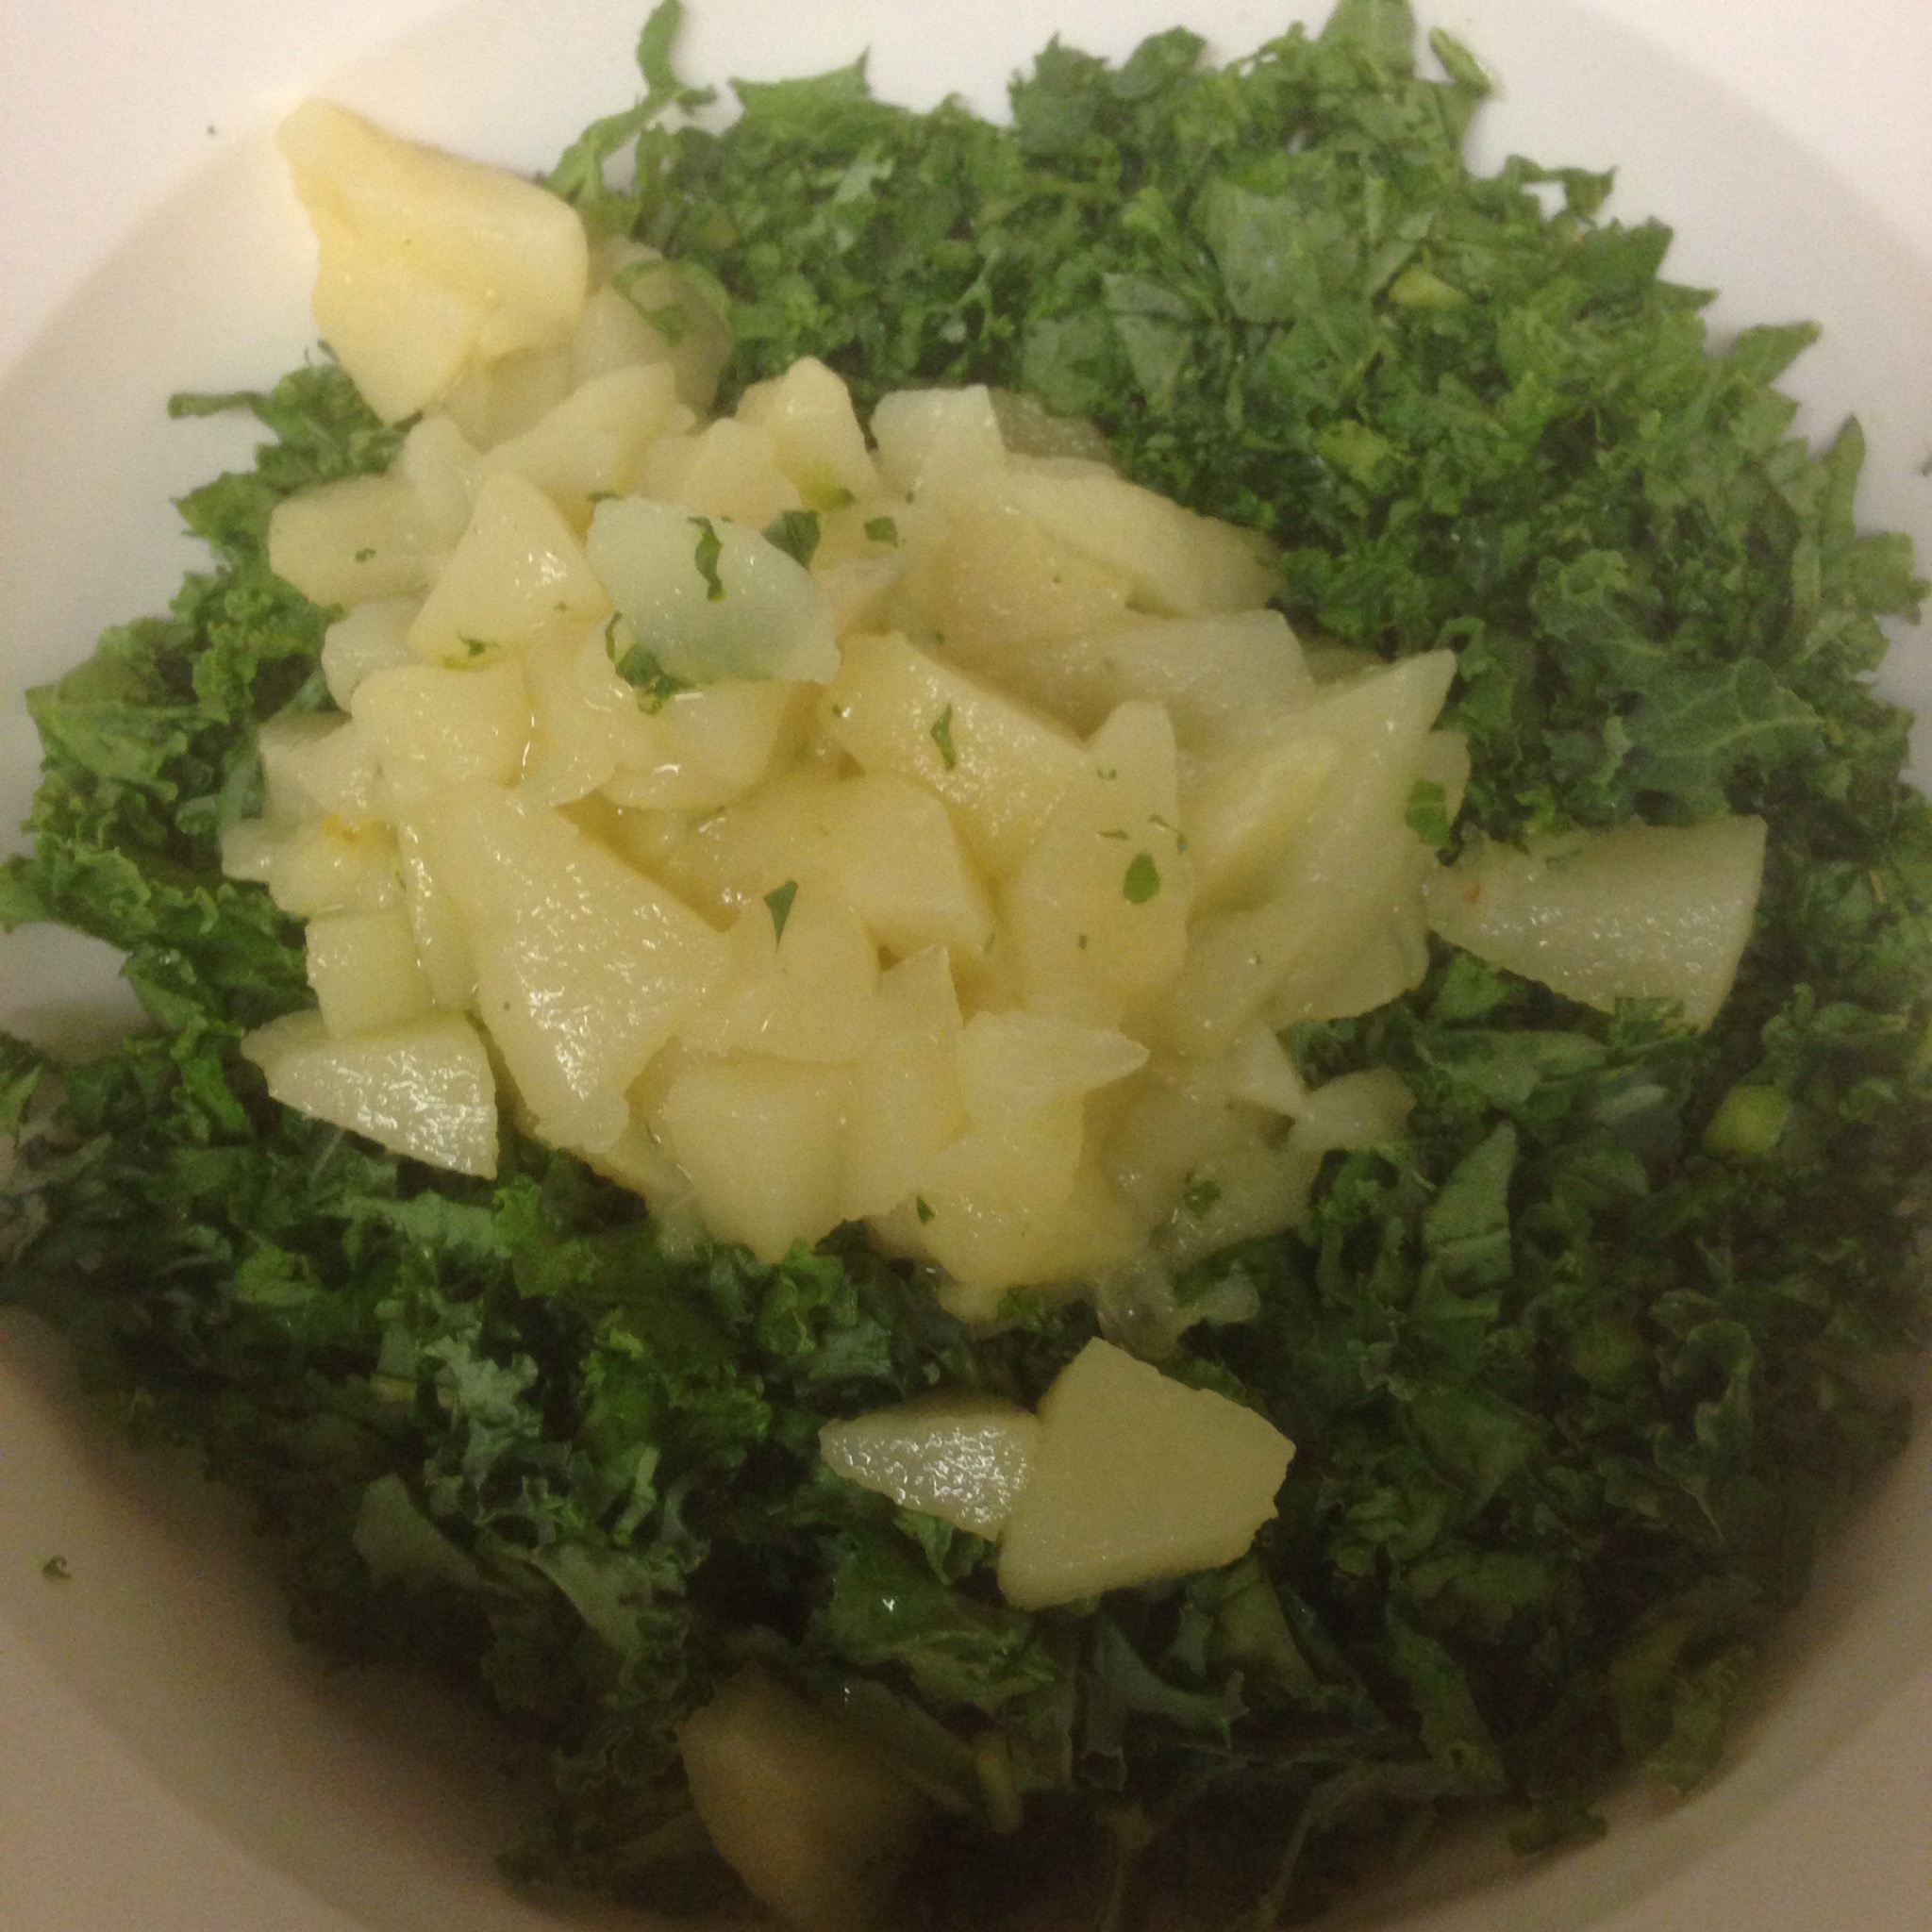 Kale and pears